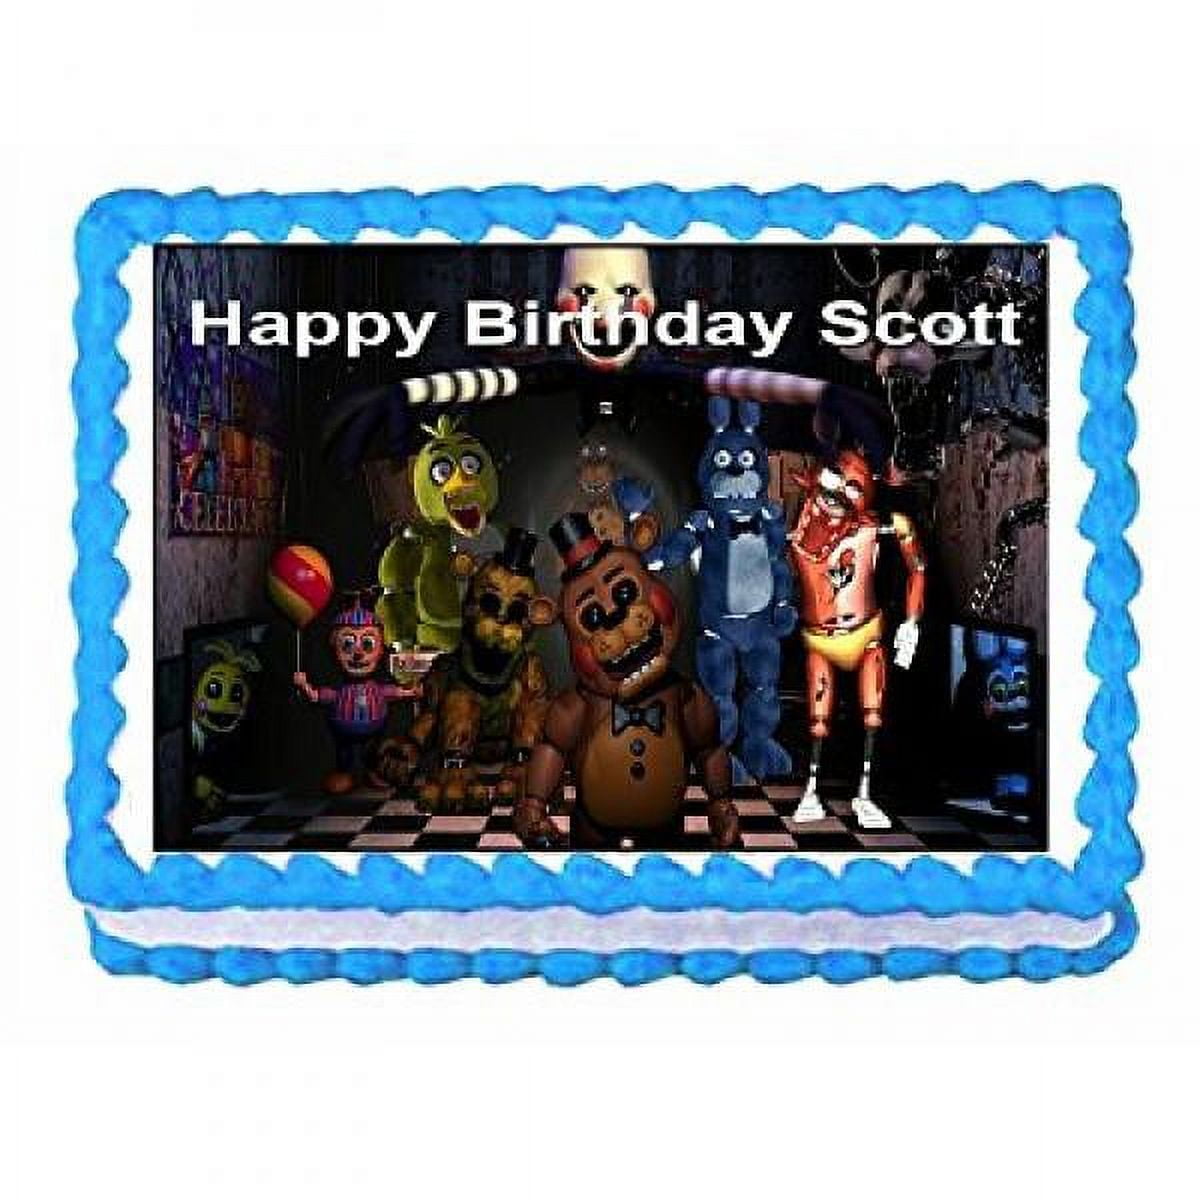 Five Nights at Freddys Fnaf Party Edible Cake Image Cake Topper -7.5